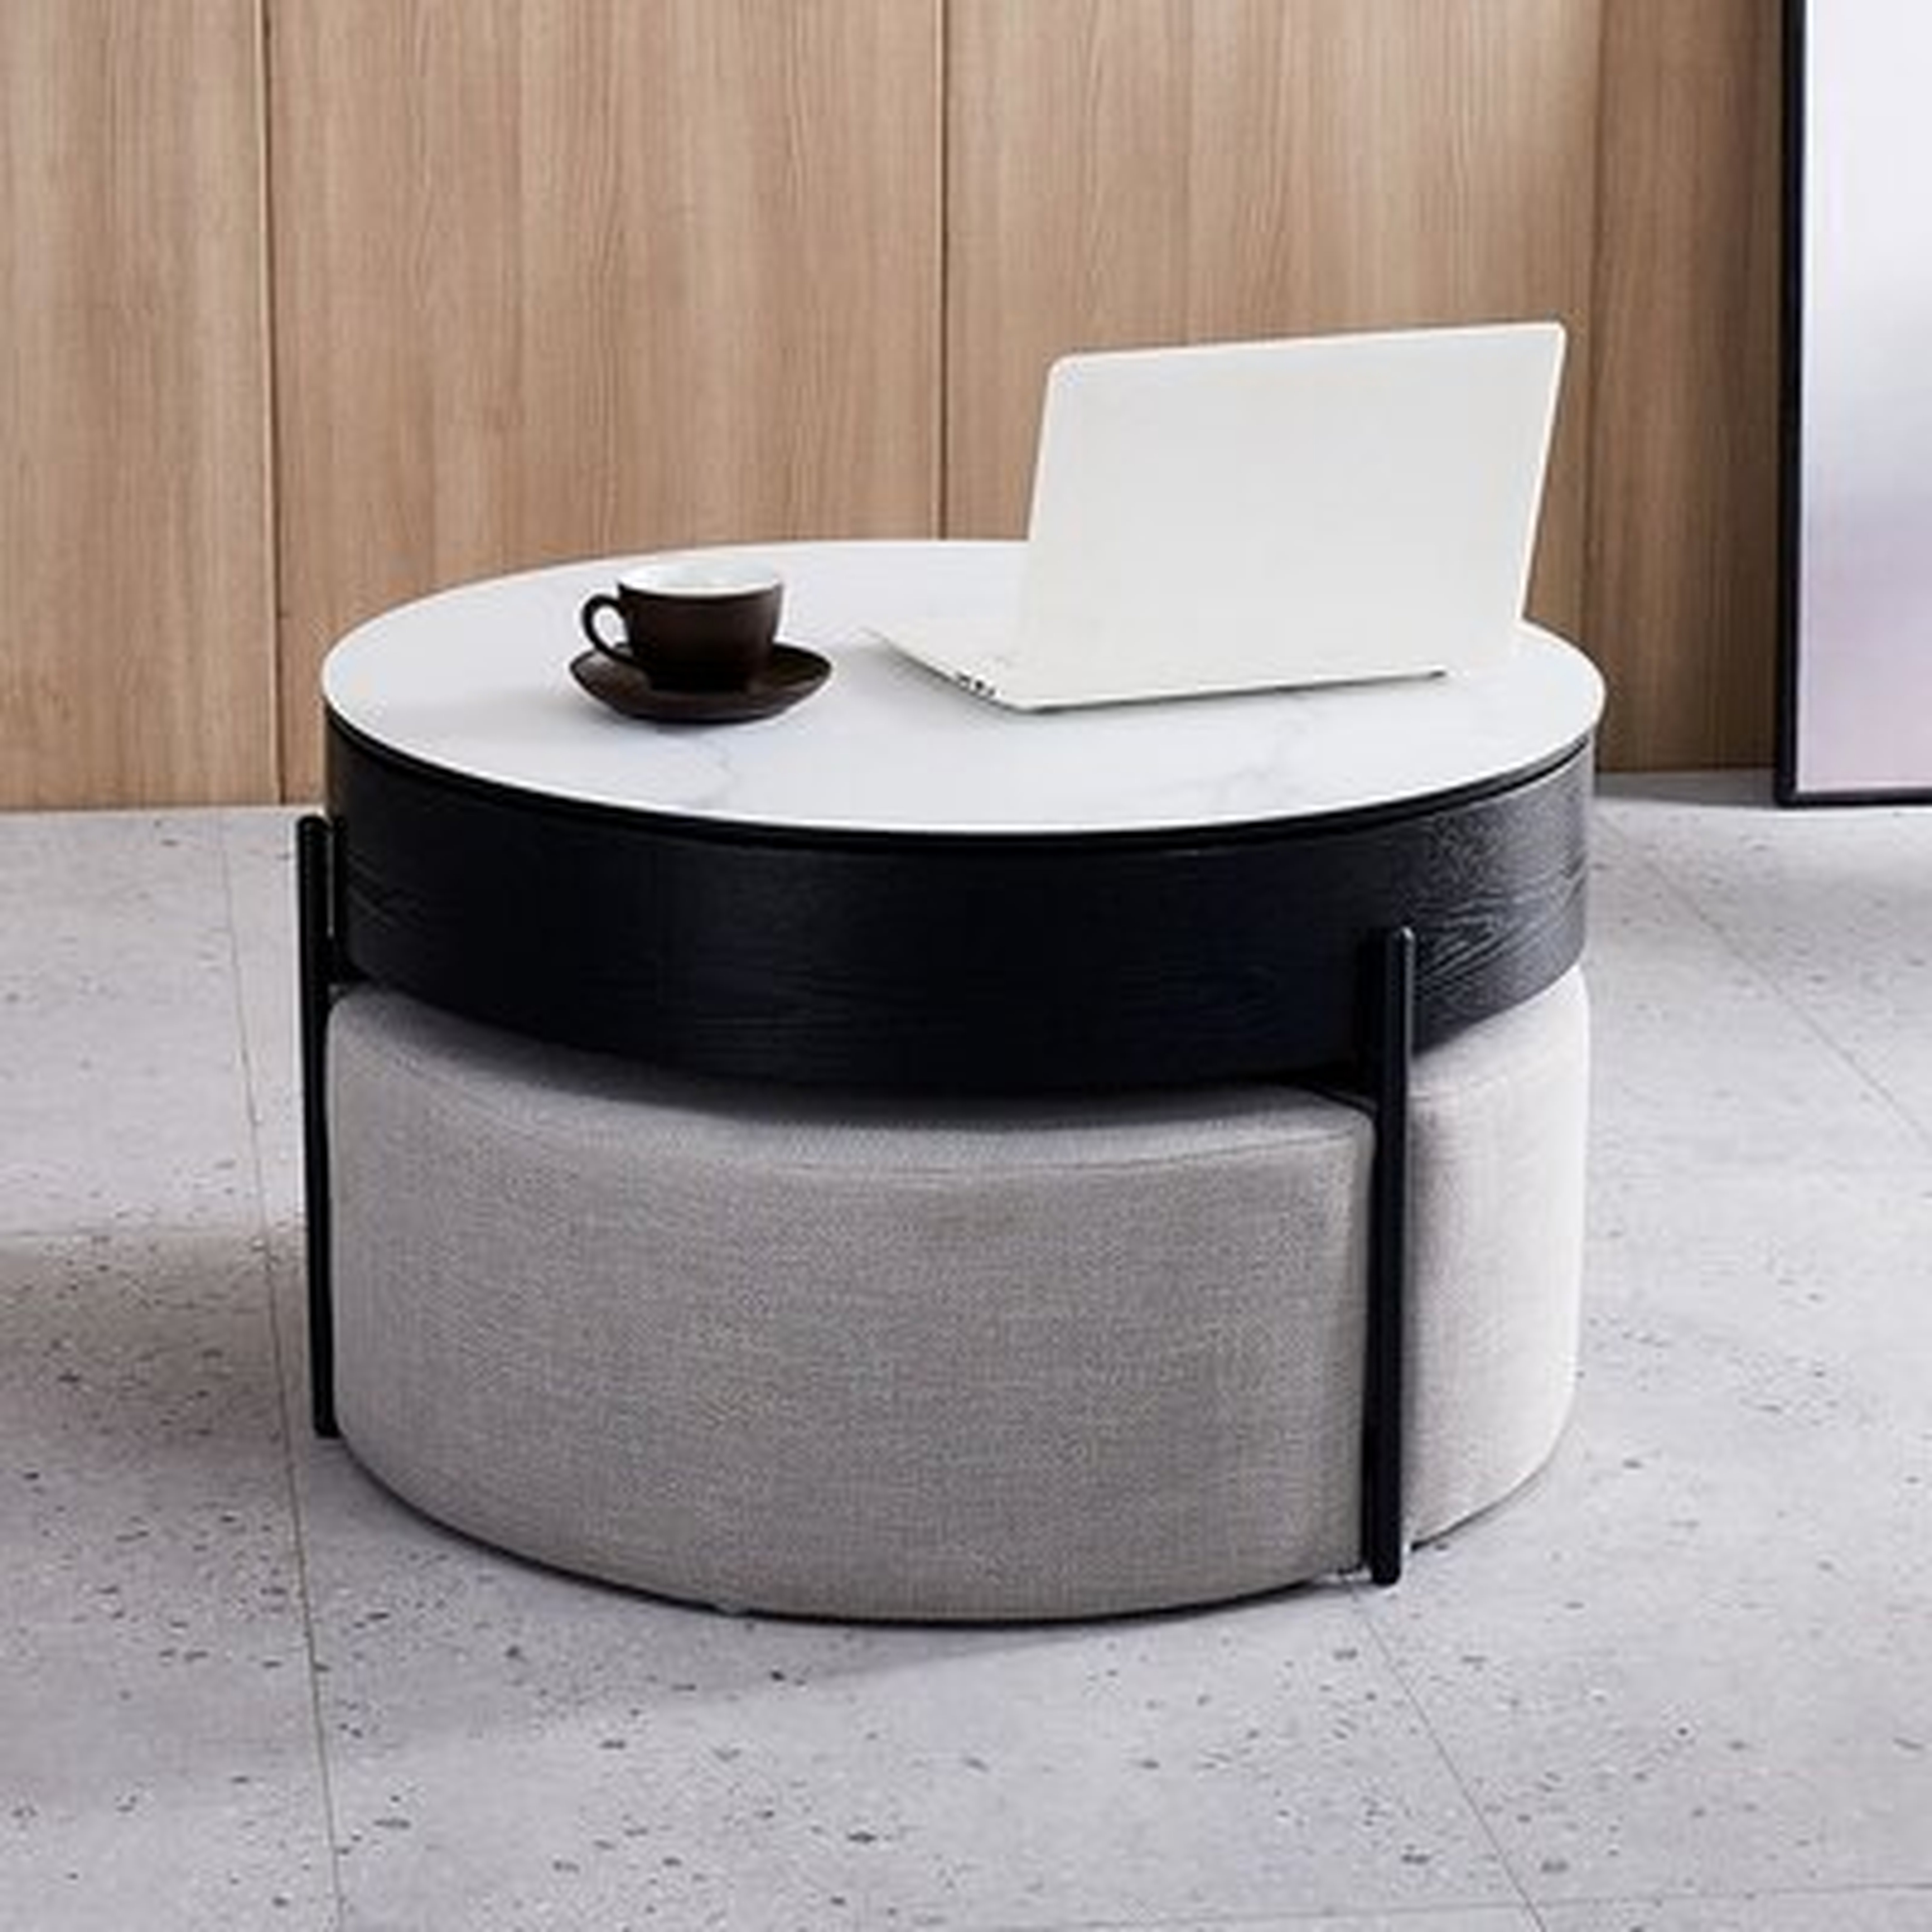 Round Lift-Top Coffee Table With Storage White&Black Without Stools - Wayfair